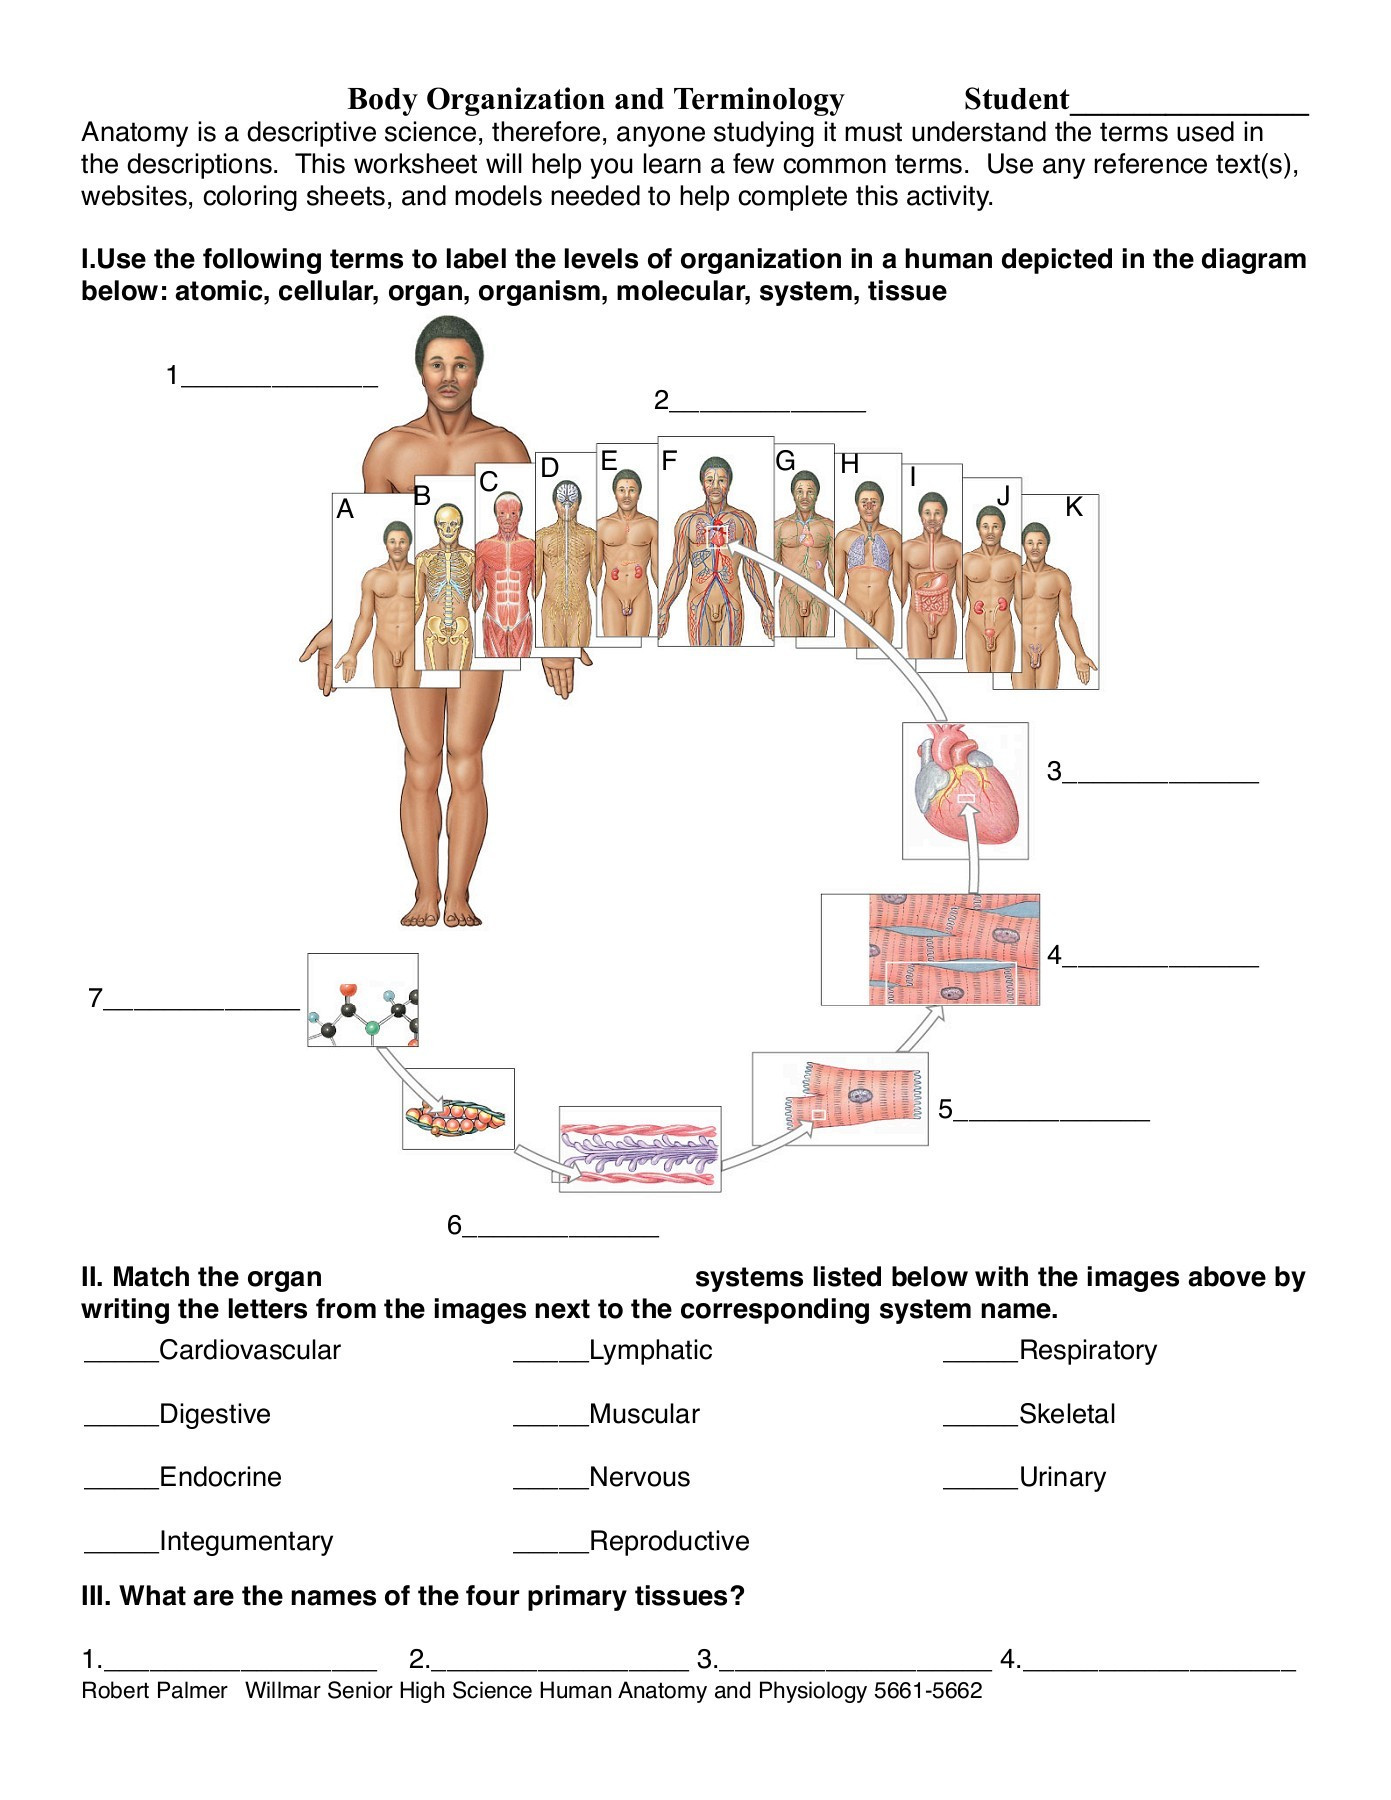 Anatomical Terms Worksheet Answers organization and Terminology Drage Homepage Pages 1 6